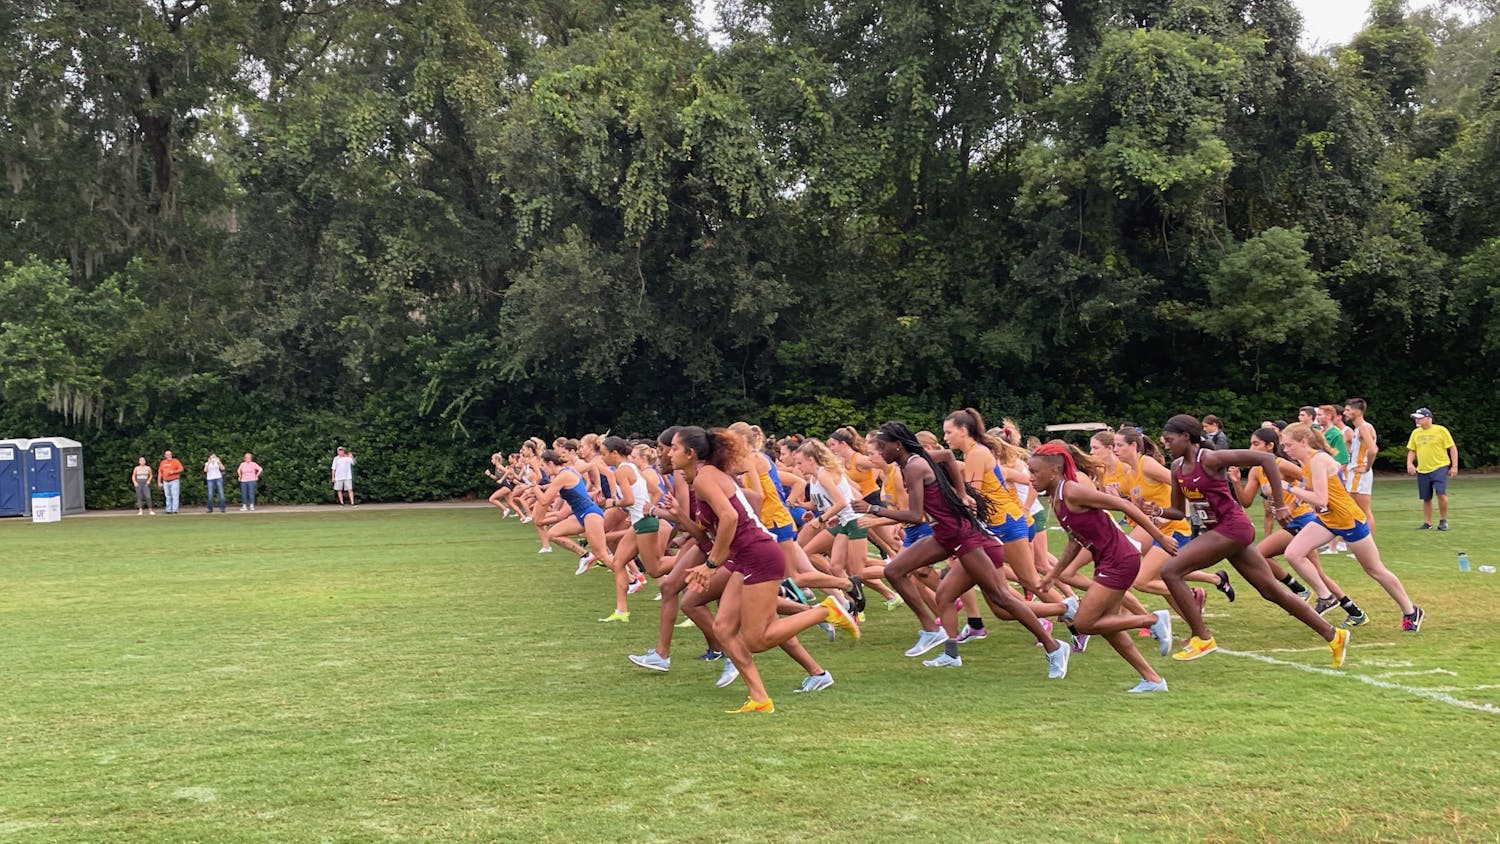 Runners start the women's race during the 2021 Mountain Dew Invitational in Gainesville, Florida on Sept. 11, 2021